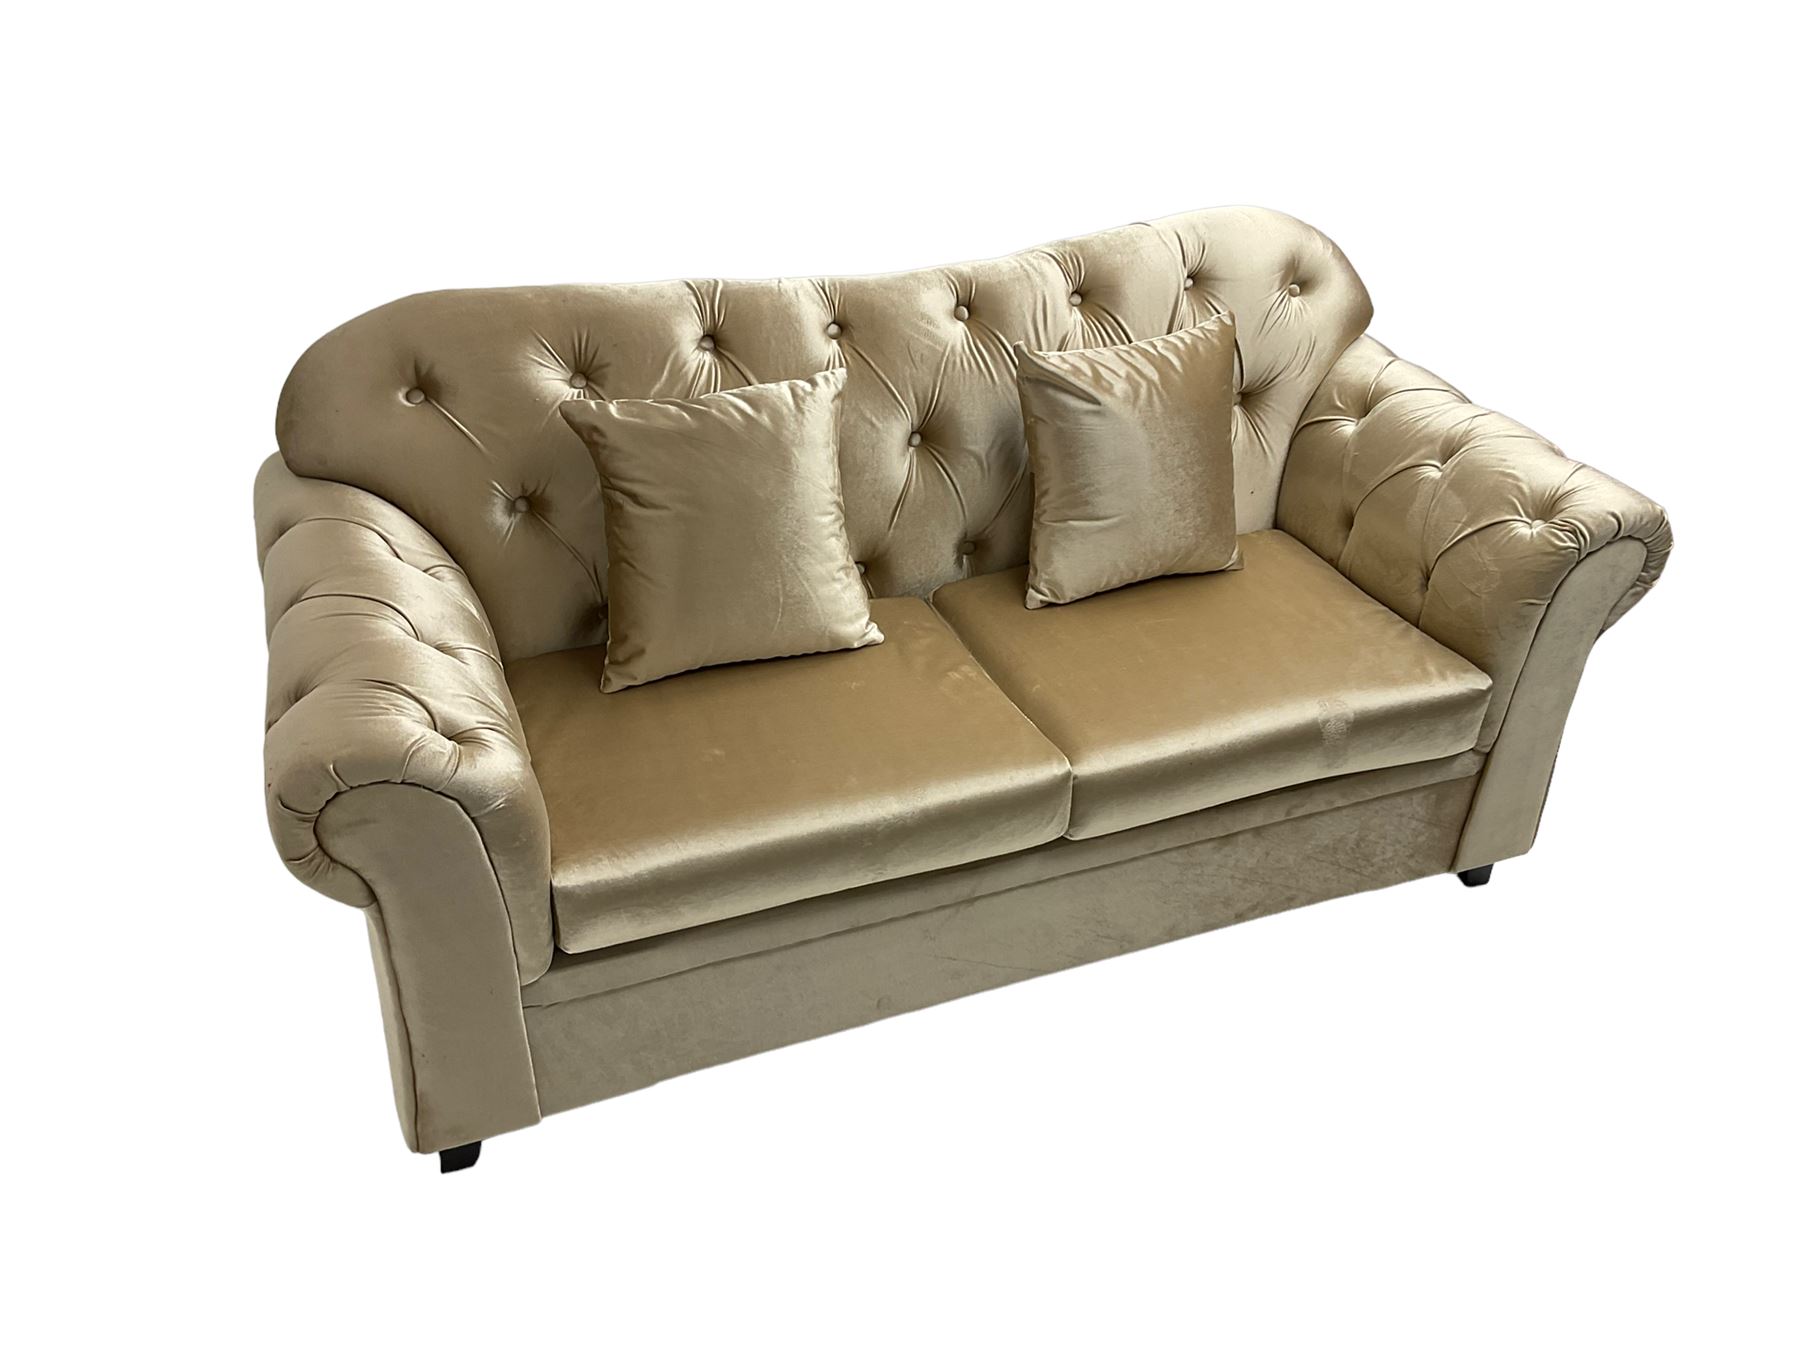 Chesterfield shaped two seat sofa - Image 6 of 6